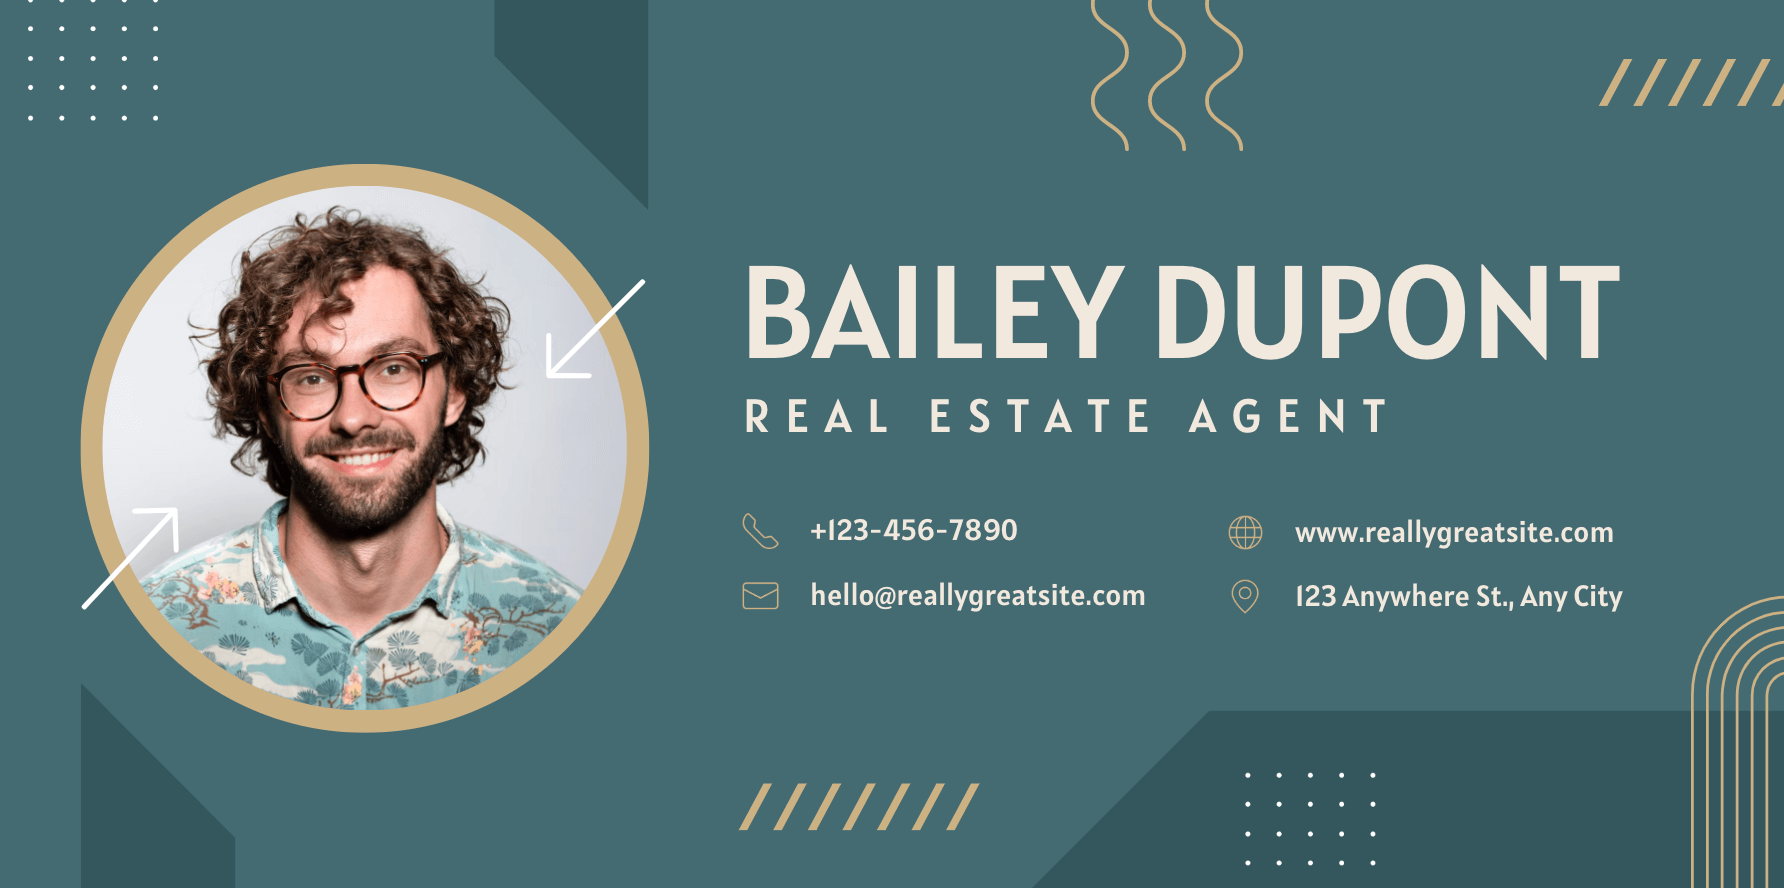 Real estate email signature with different contact methods